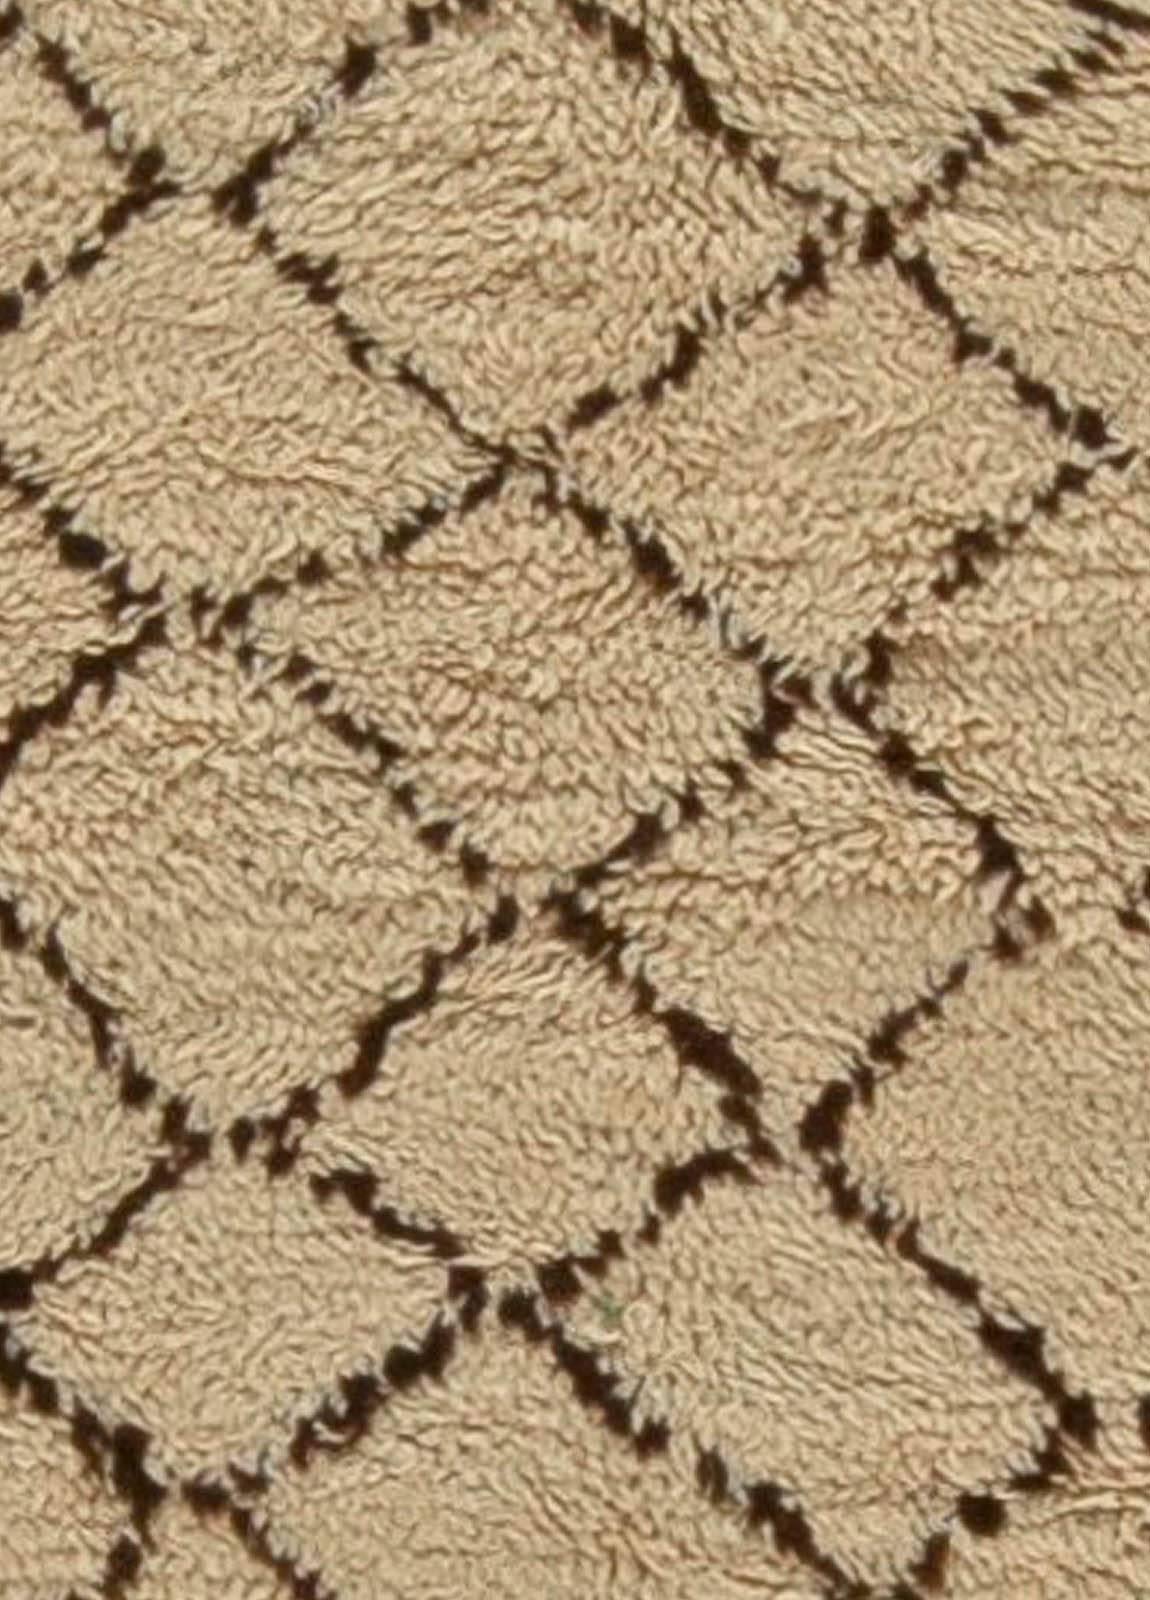 This vintage Moroccan runner rug features an all-over design of a brown lattice against a field of neutral beige, circa 1940. Stark and Minimalist, the vintage carpet is an intriguing abstract statement. Moroccan rugs have typically been woven by